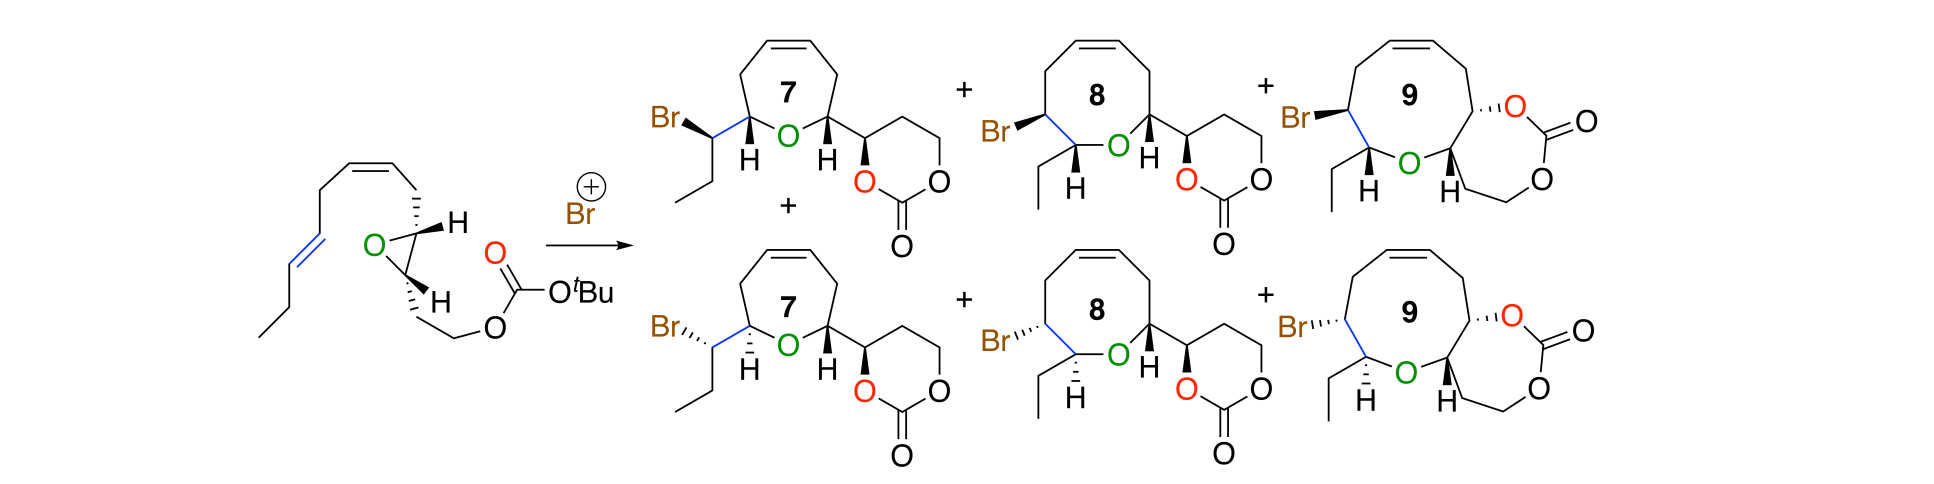 A Unifying Stereochemical Analysis for the Formation of Halogenated C15-Acetogenin Medium-Ring Ethers From Laurencia Species via Intramolecular Bromonium Ion Assisted Epoxide Ring-Opening and Experimental Corroboration with a Model Epoxide